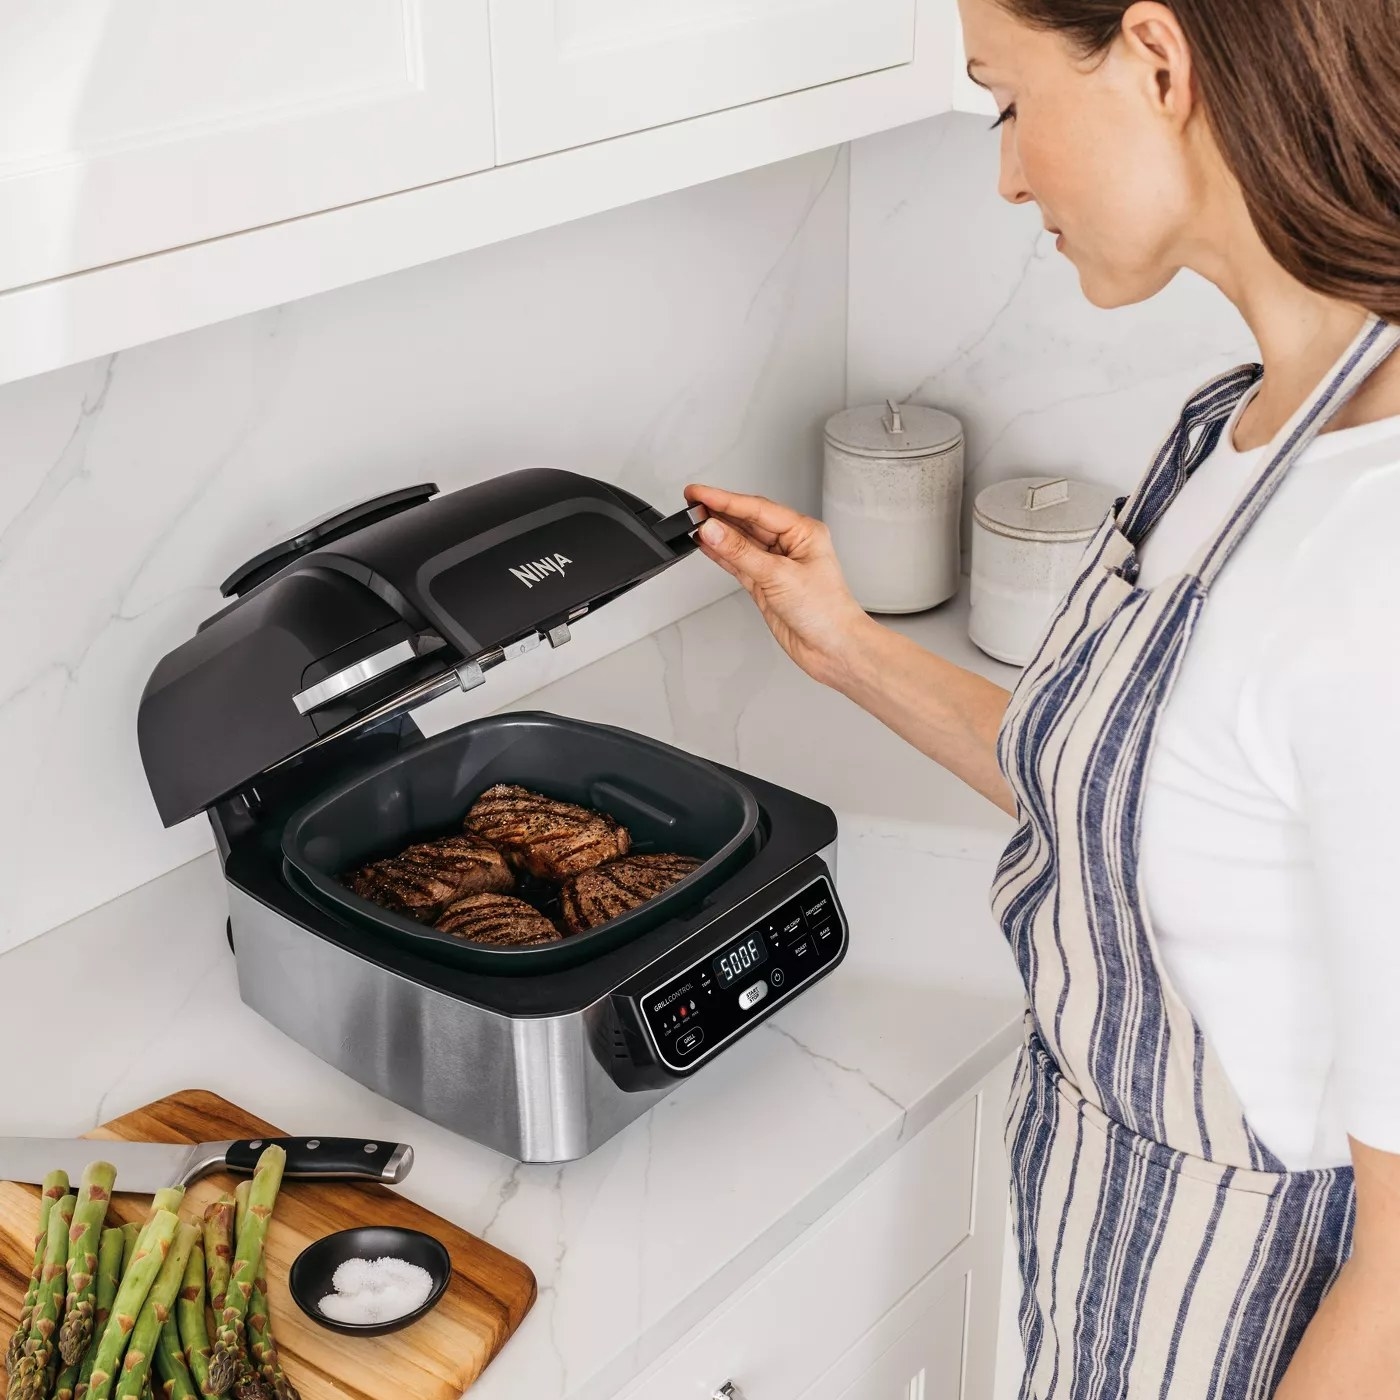 A model checking the four steaks cooking on her Ninja indoor grill and air fryer